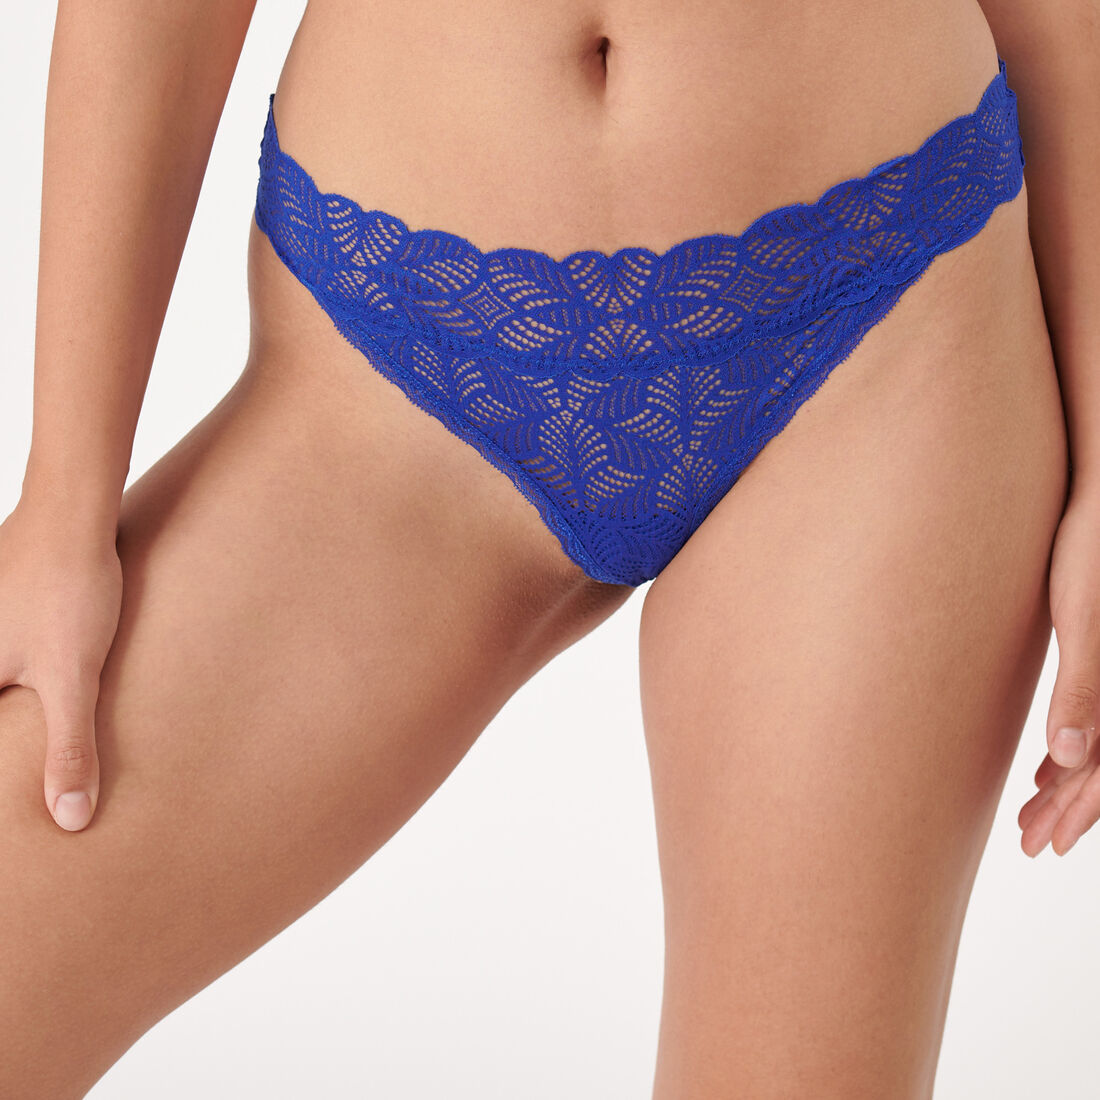 100% lace thong - baby blue;